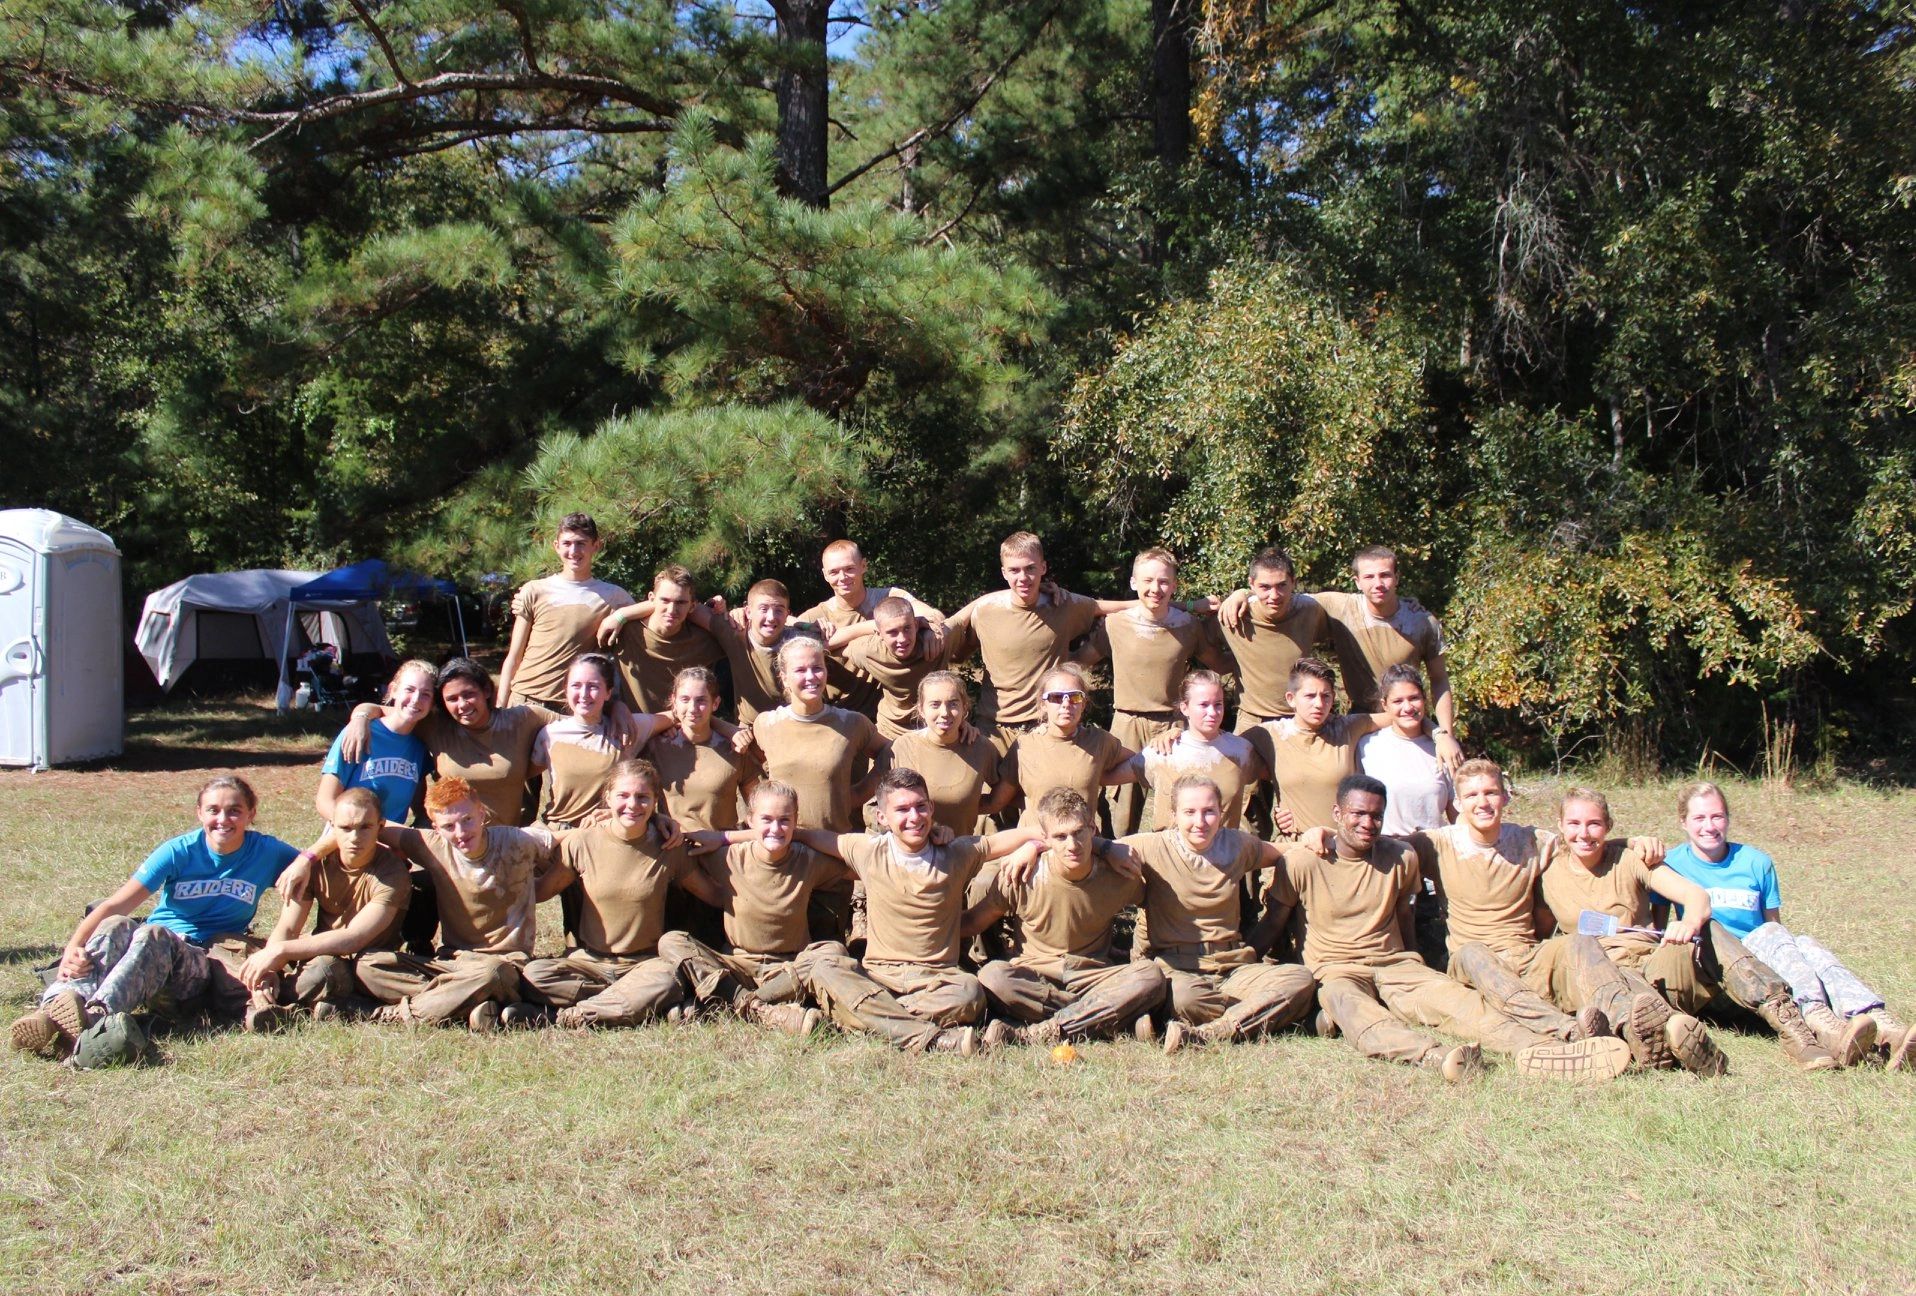 The Raiders immediately after the Cross Country Rescue event at a National Competition-Molena, GA.